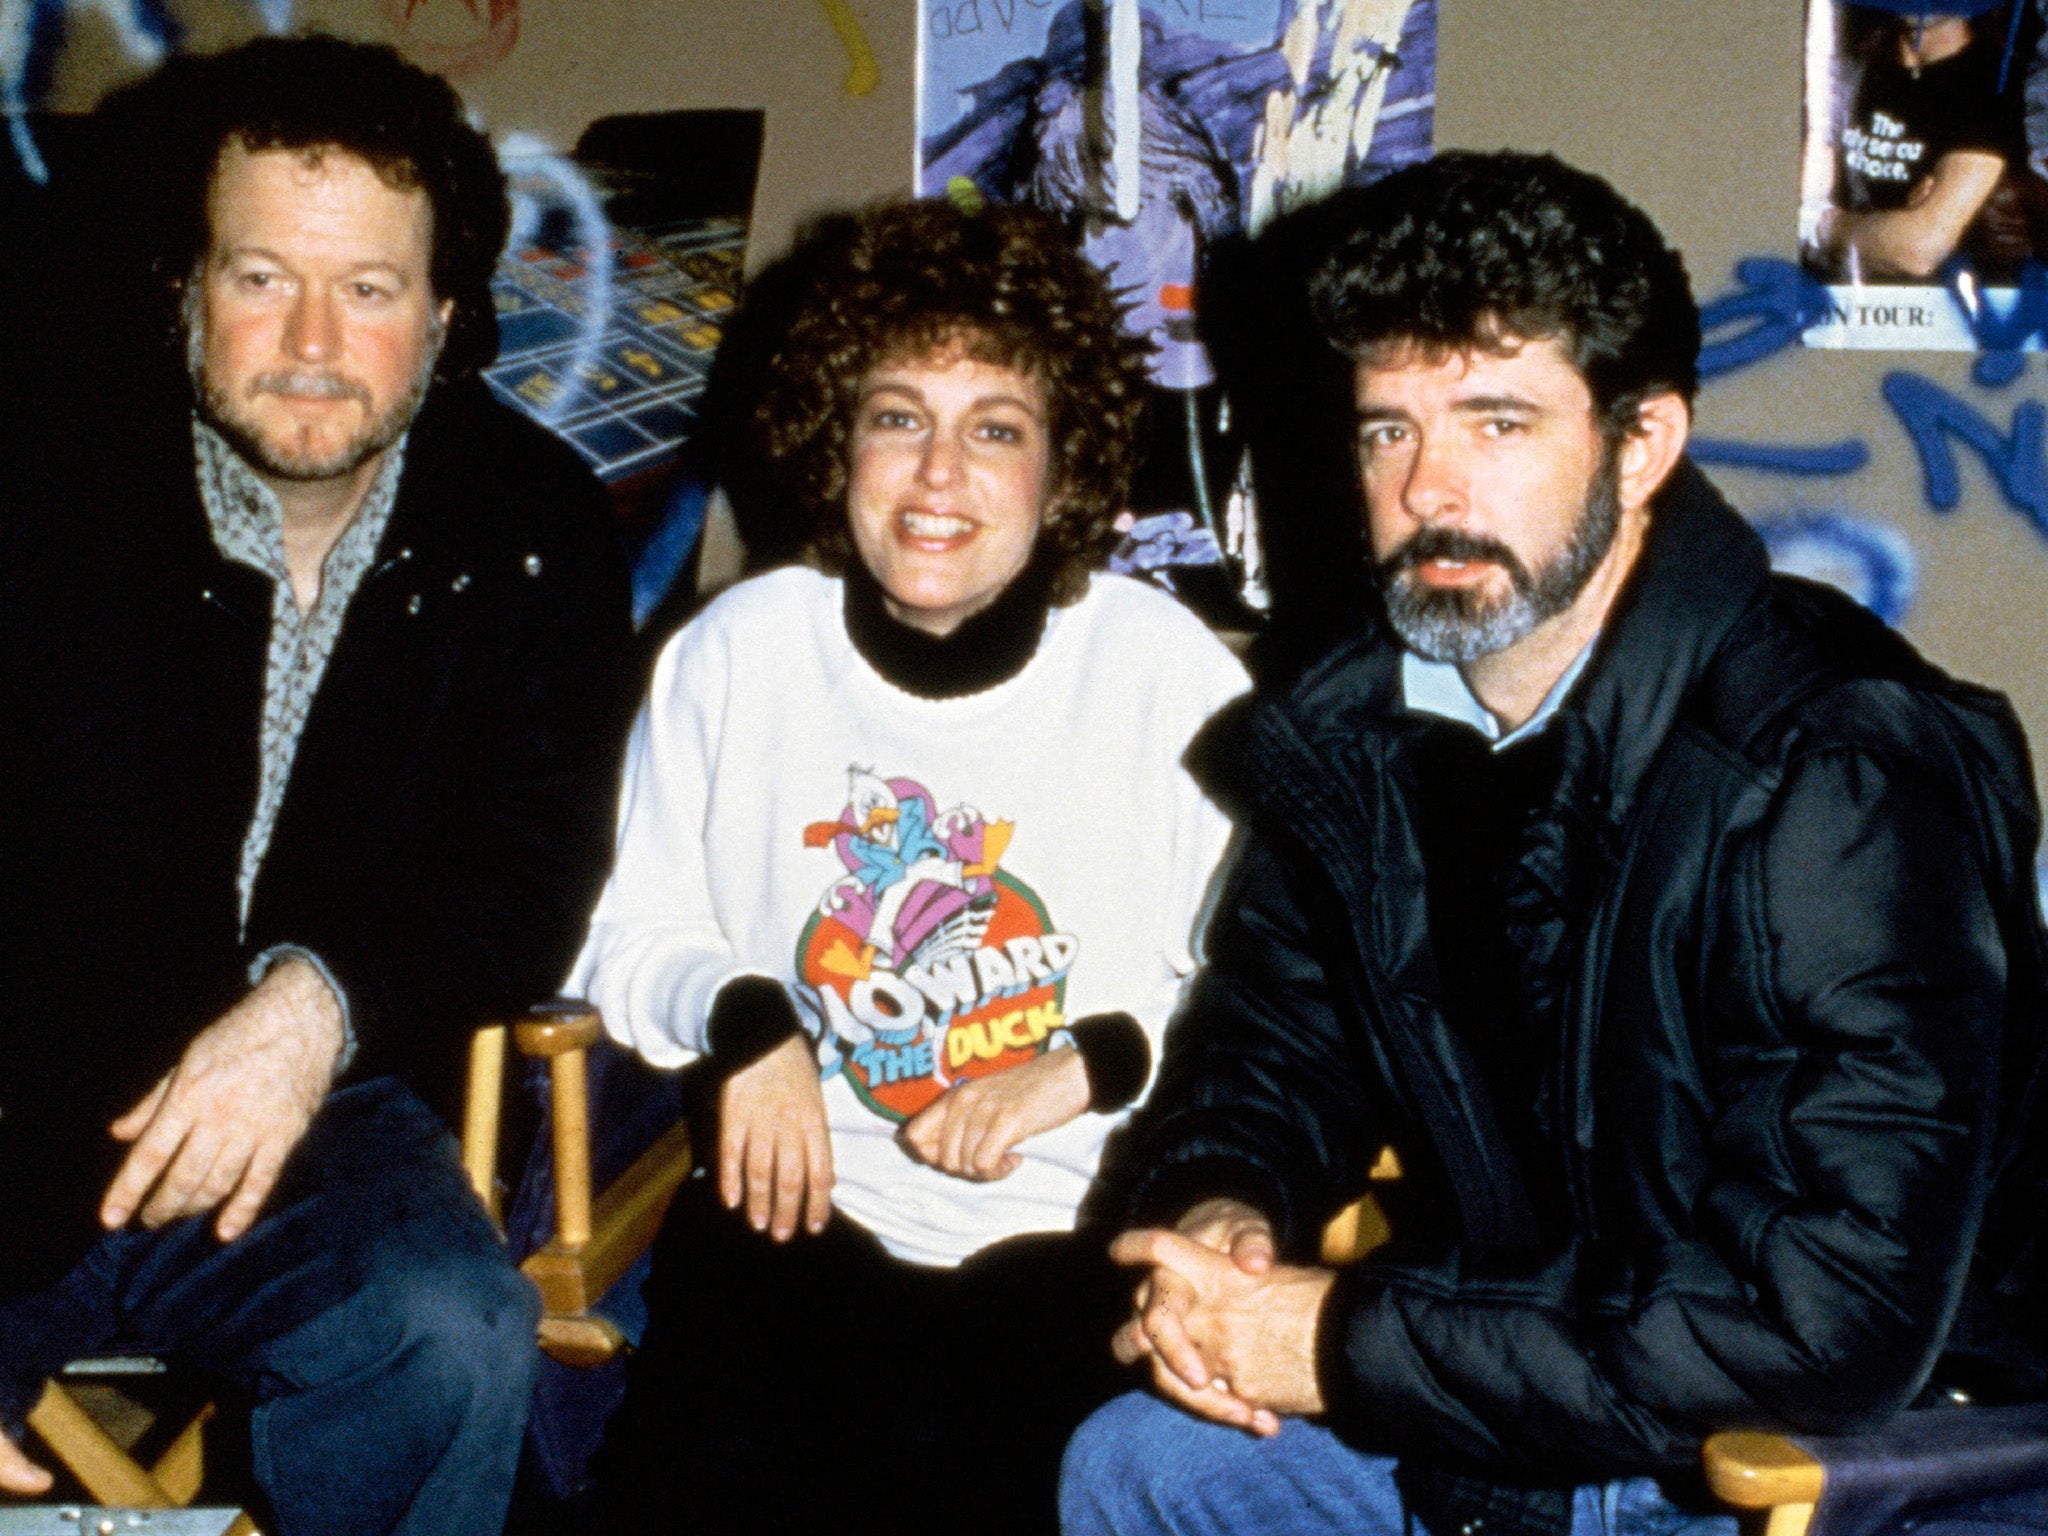 Gloria Katz (centre) with her husband Willard Huyck (left) and 'Star Wars' director George Lucas (right)